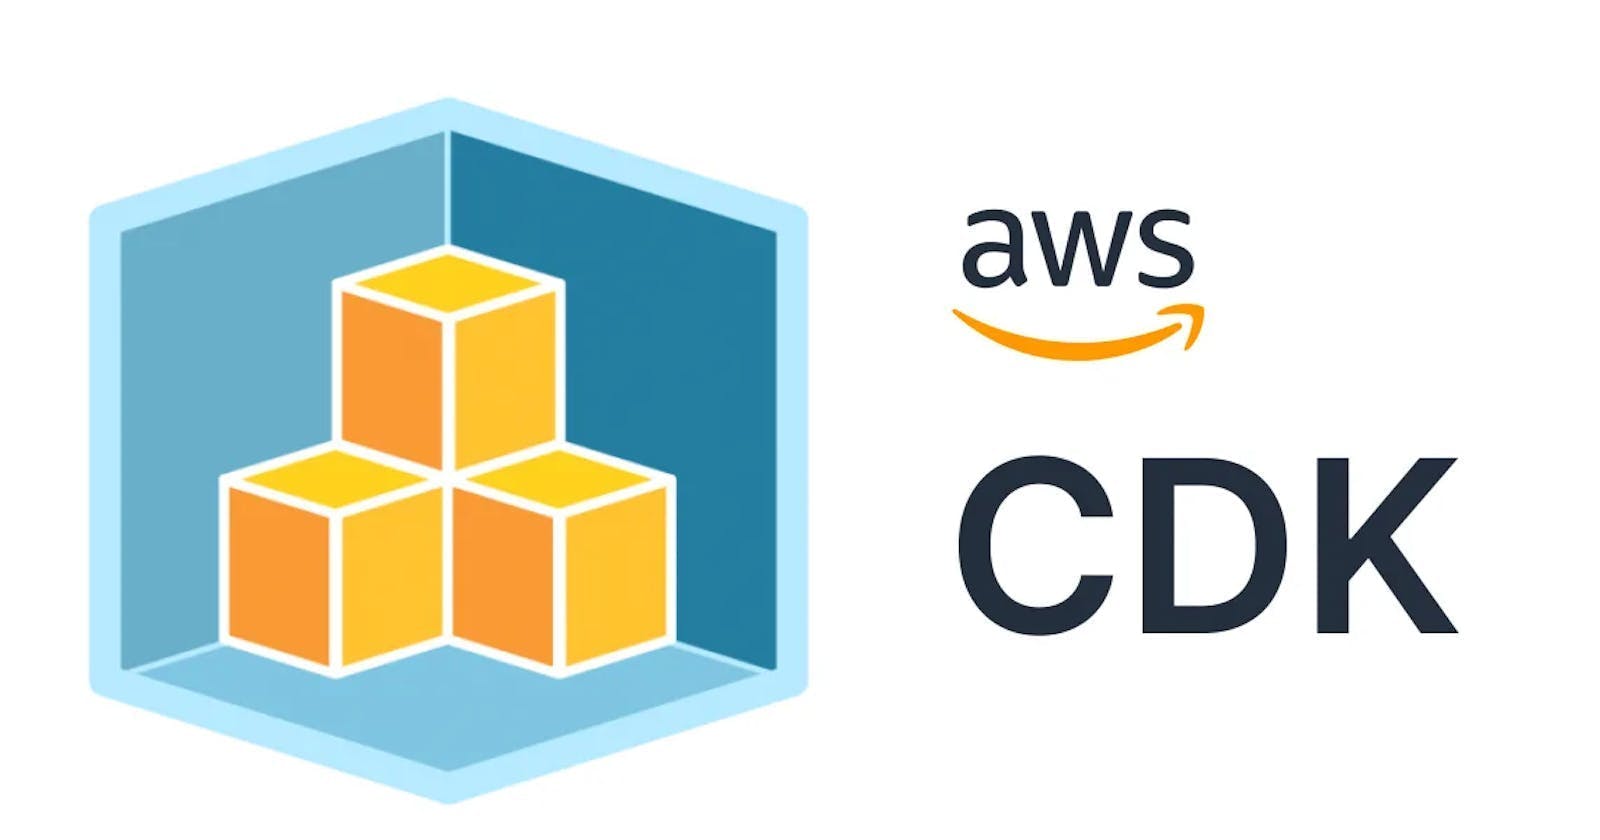 Provisioning a Lambda Function in a VPC with Internet Access Using AWS CDK